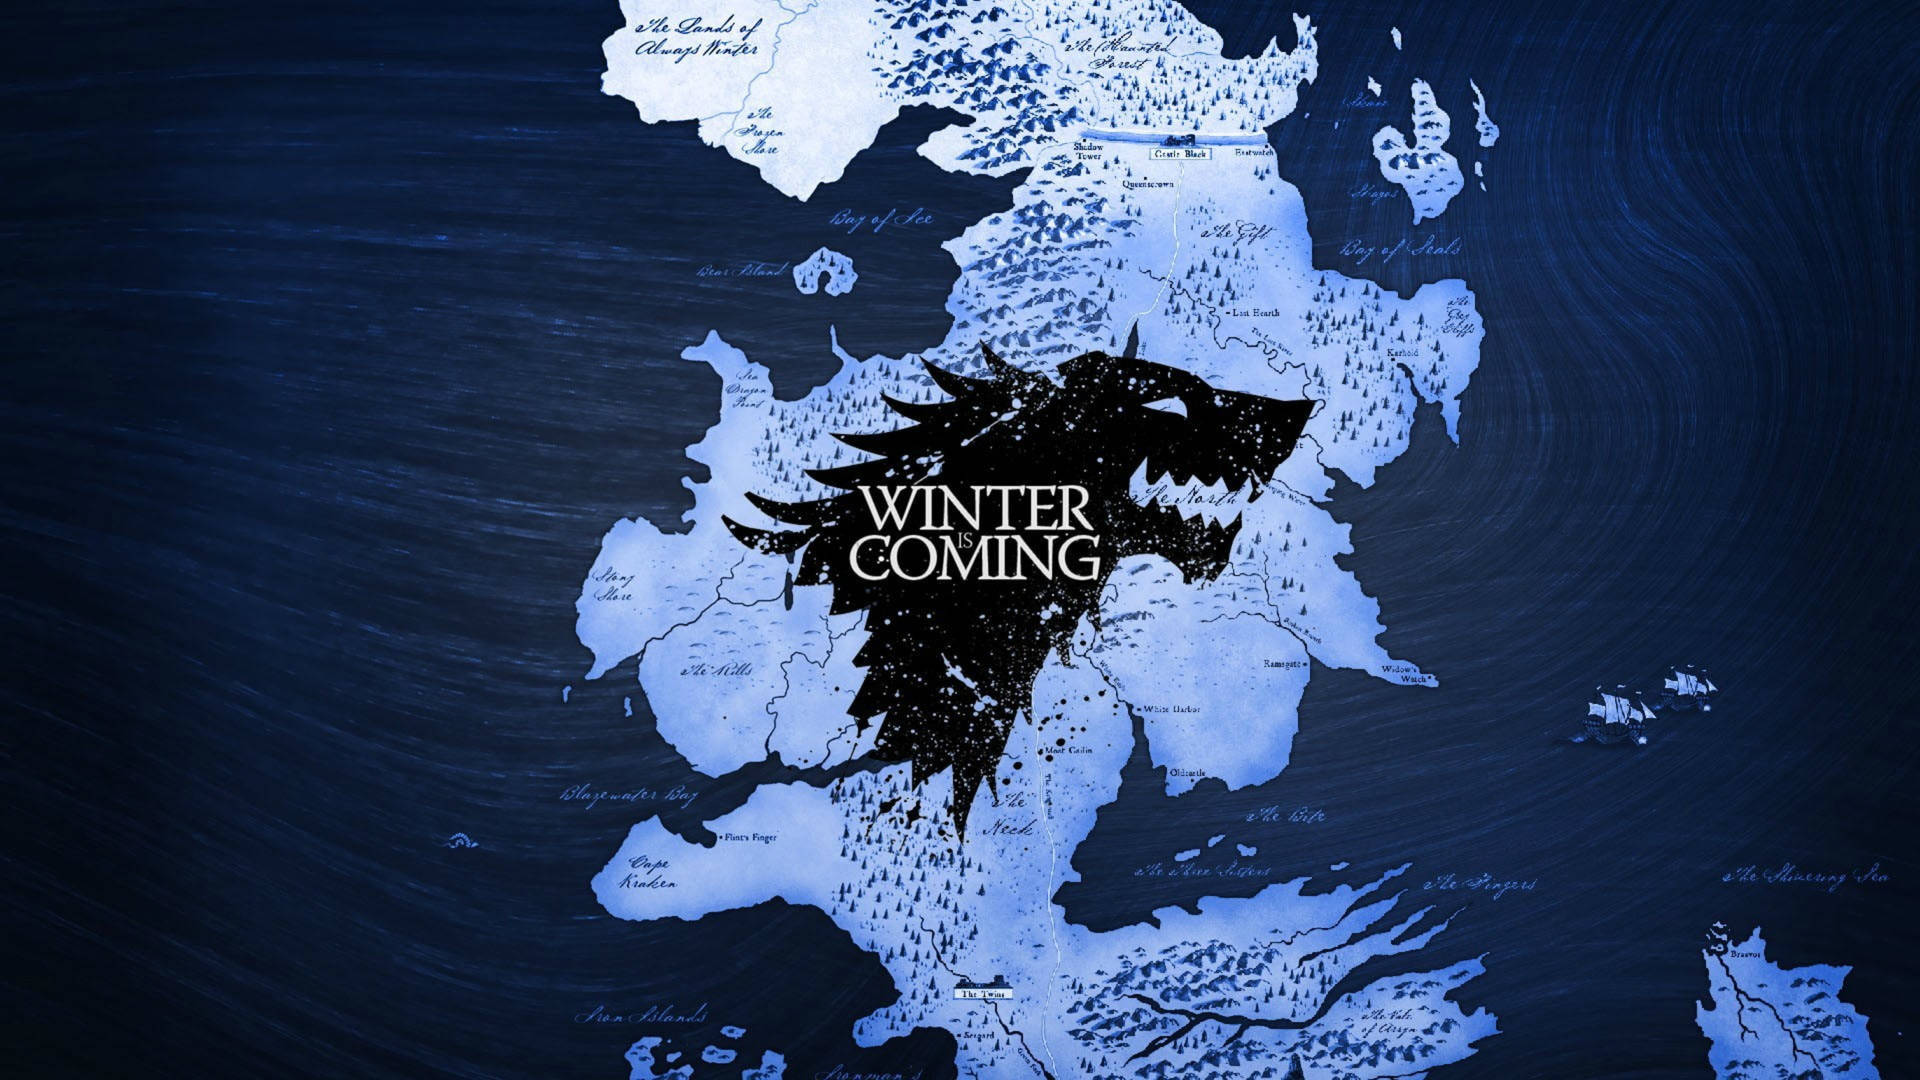 House Stark Winter Is Coming Map Wallpaper